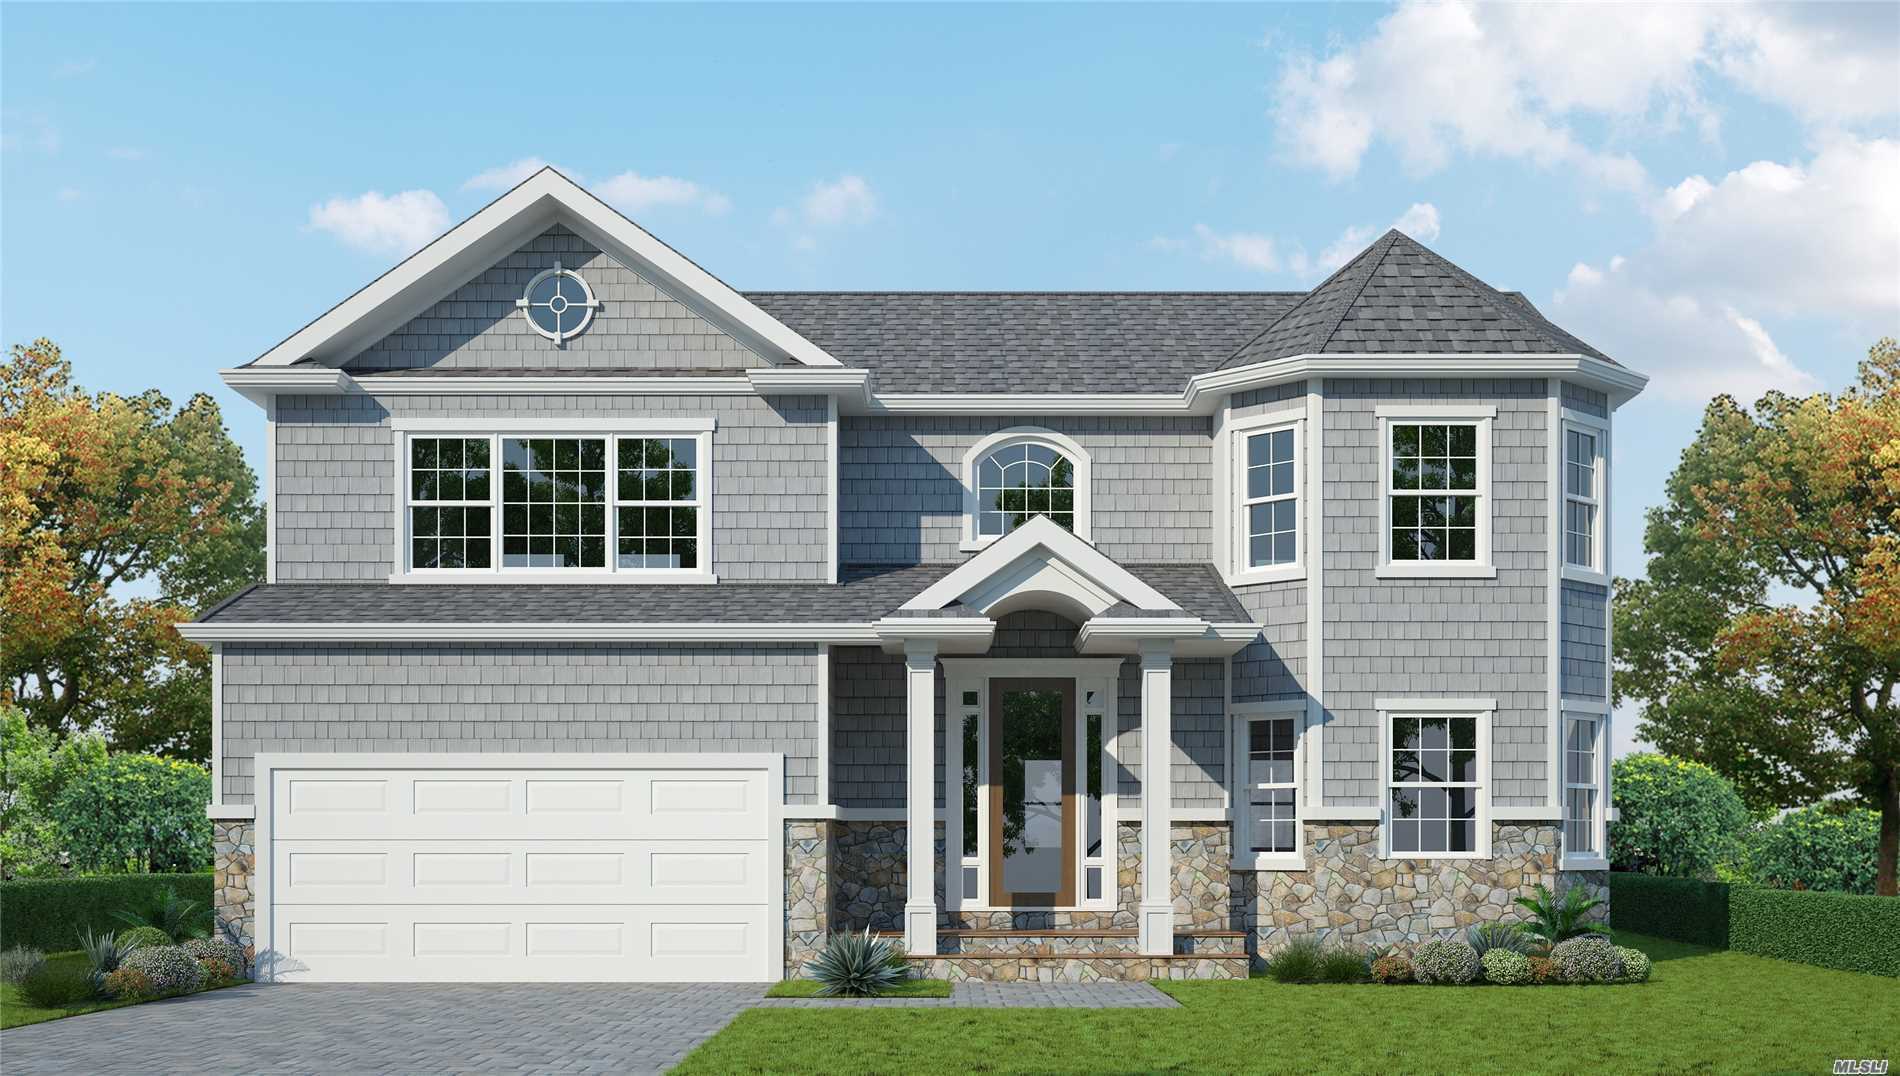 Take A Tour Of This Dream Home! Prime Plainview Location, In A Cul-De-Sac, Beyond Beautiful, Over 3400 Sq Ft Of Extraordinary New Construction, Boasting 5 Bdrms, 3 Fbths, Guest Rm On Main Level W/Fbth, Formal Dr, Lr, Full Basement, 2 Car Garage, Beautiful Flow & Spacious Layout, High End Finishes & Appliances, Elegant Master Bdrm Suite W/A European Style Shower/Bath Wet Room & An Enormous Walk In Closet, Large Property, Plainview Sd , Exceptional Craftsmanship, A Must See!